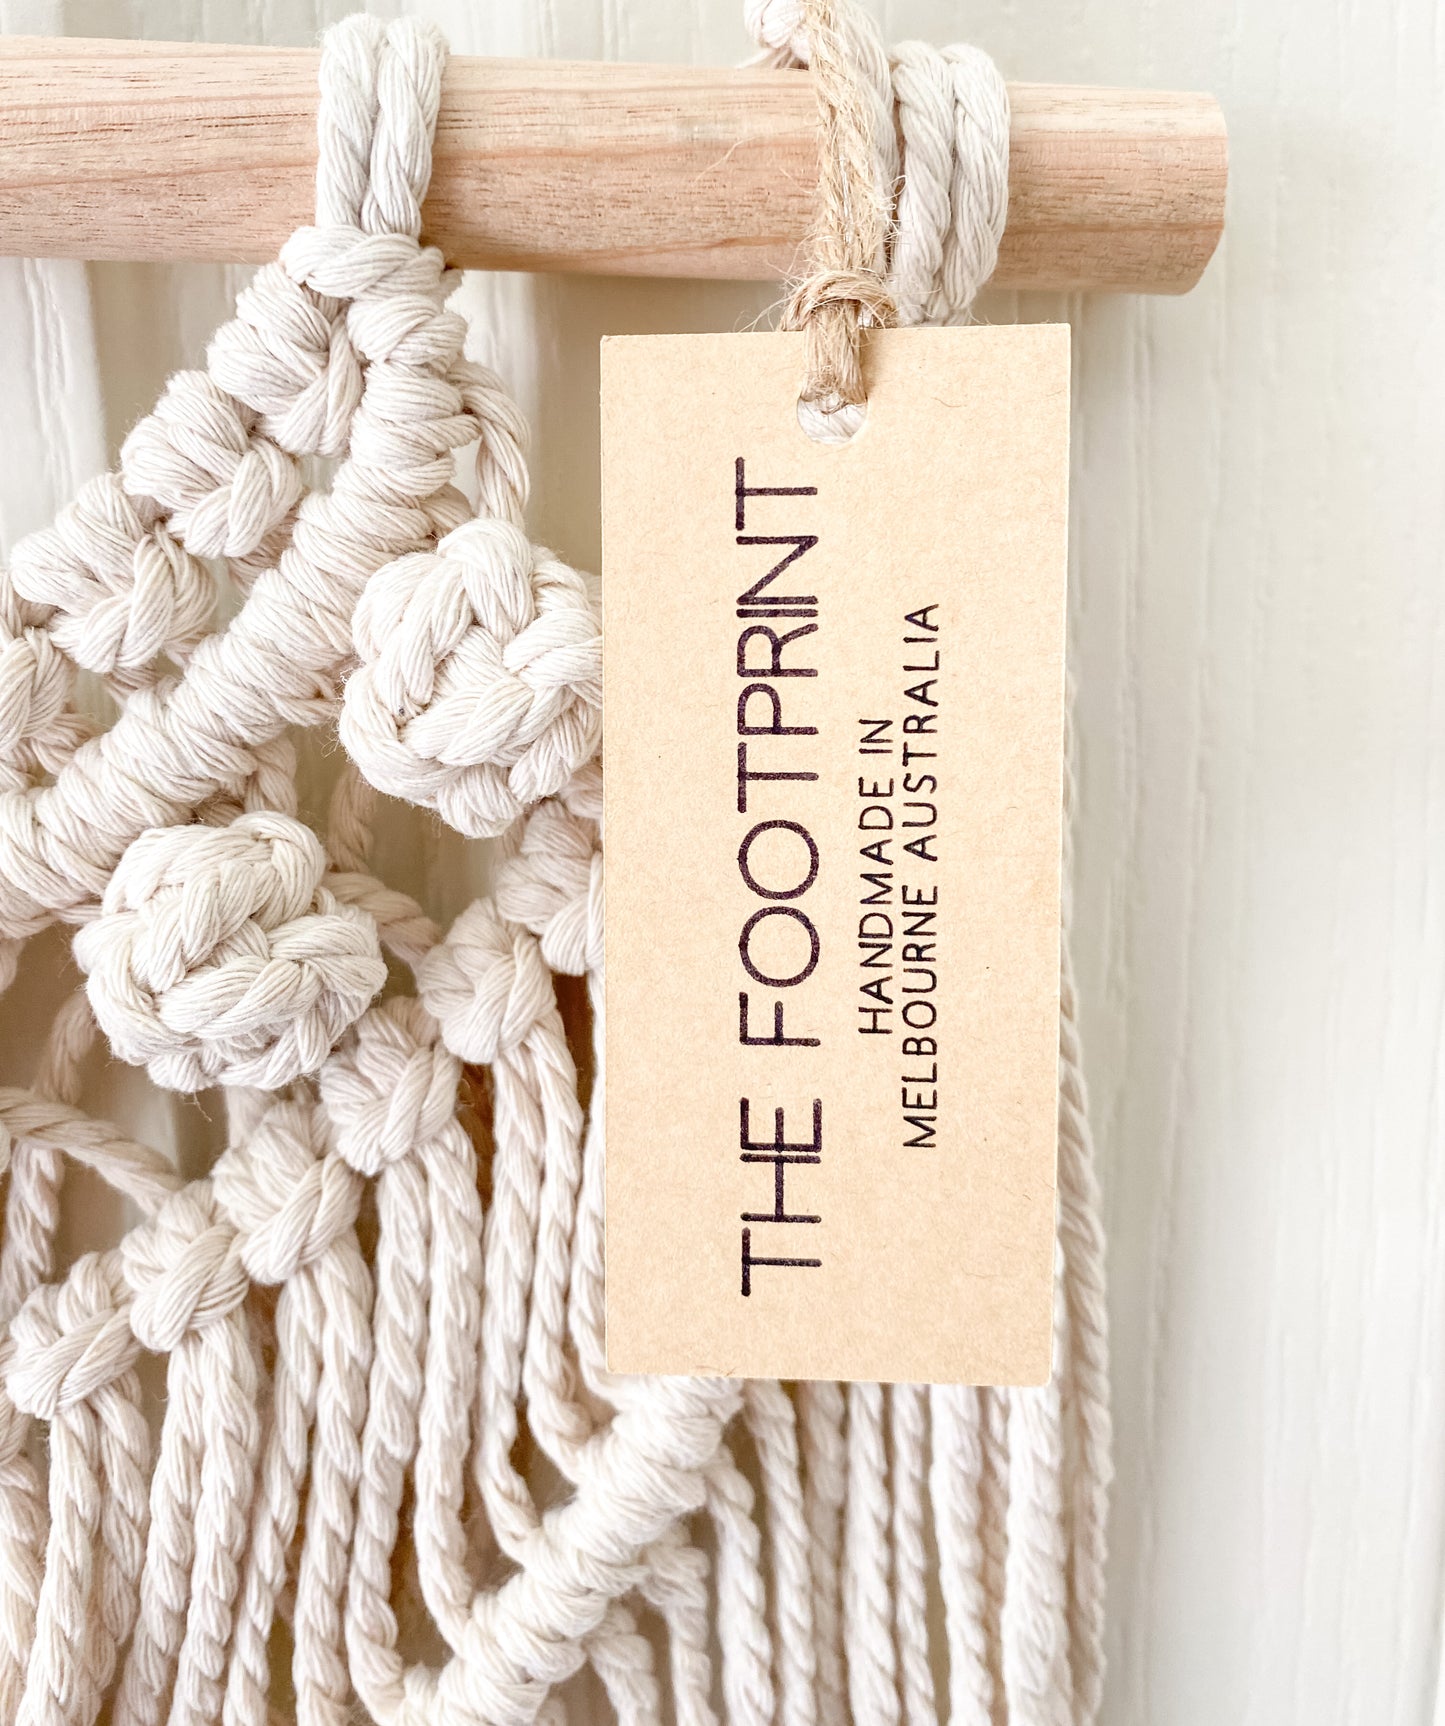 Close up image of tassels hanging witha product tag on. Product tag reads The Footprint handmade inn Melbourne, Australia